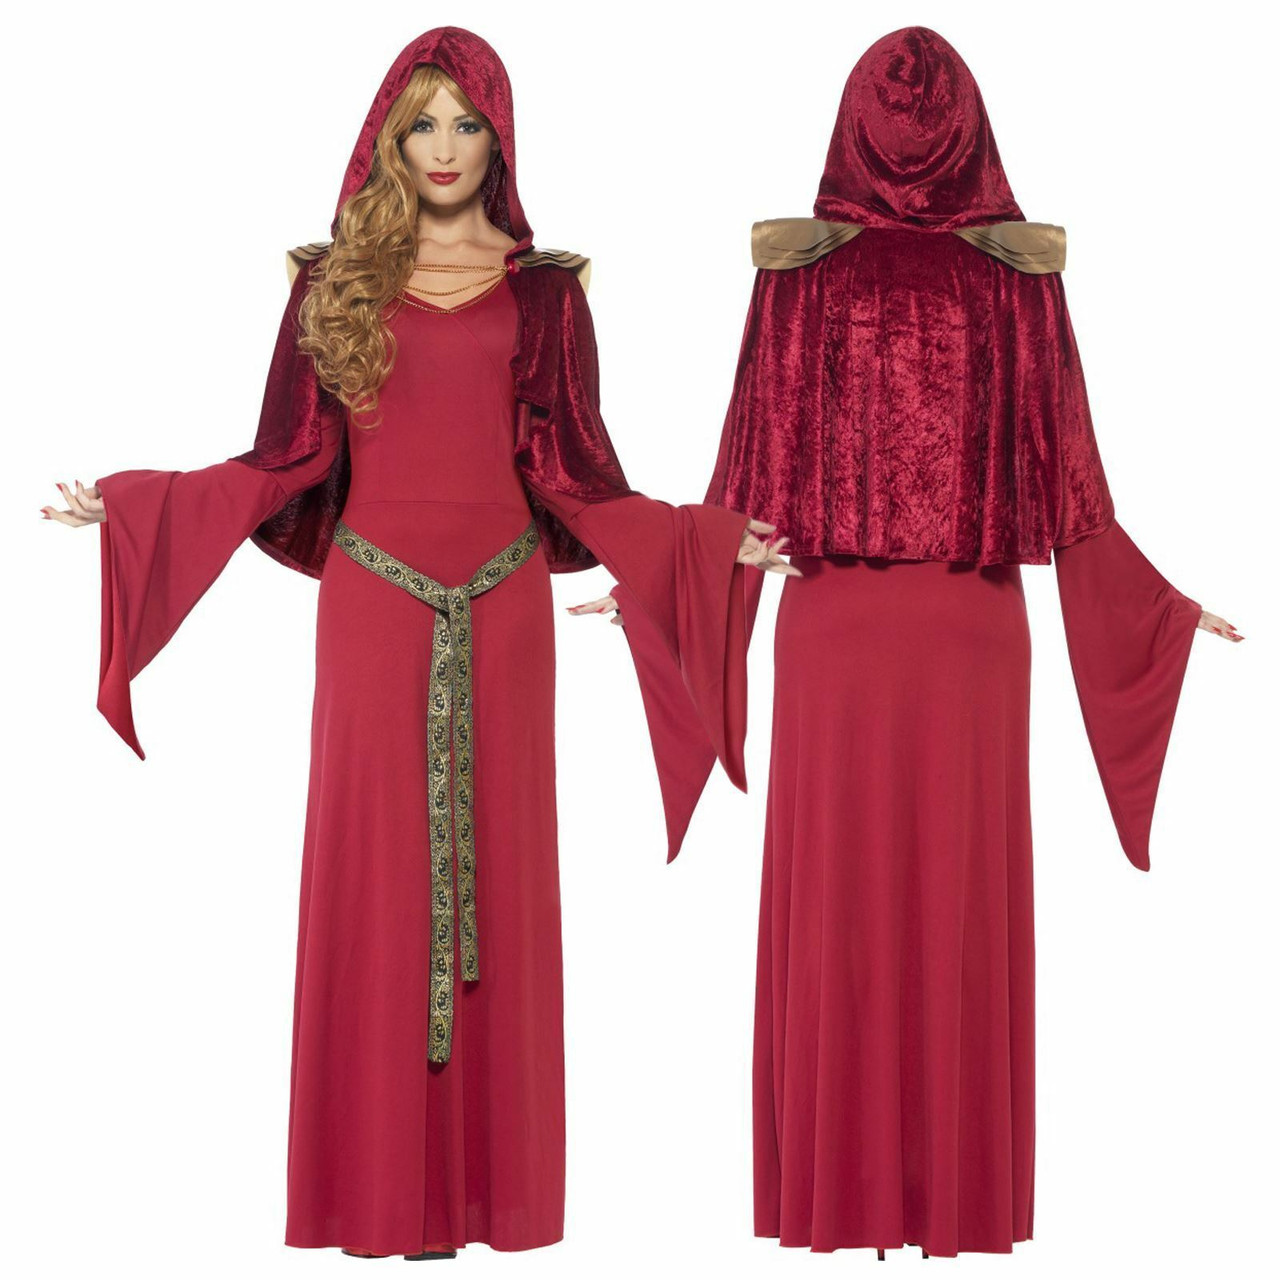 Adult Ladies High Priestess Religious Hooded Robe Fancy Dress Costume